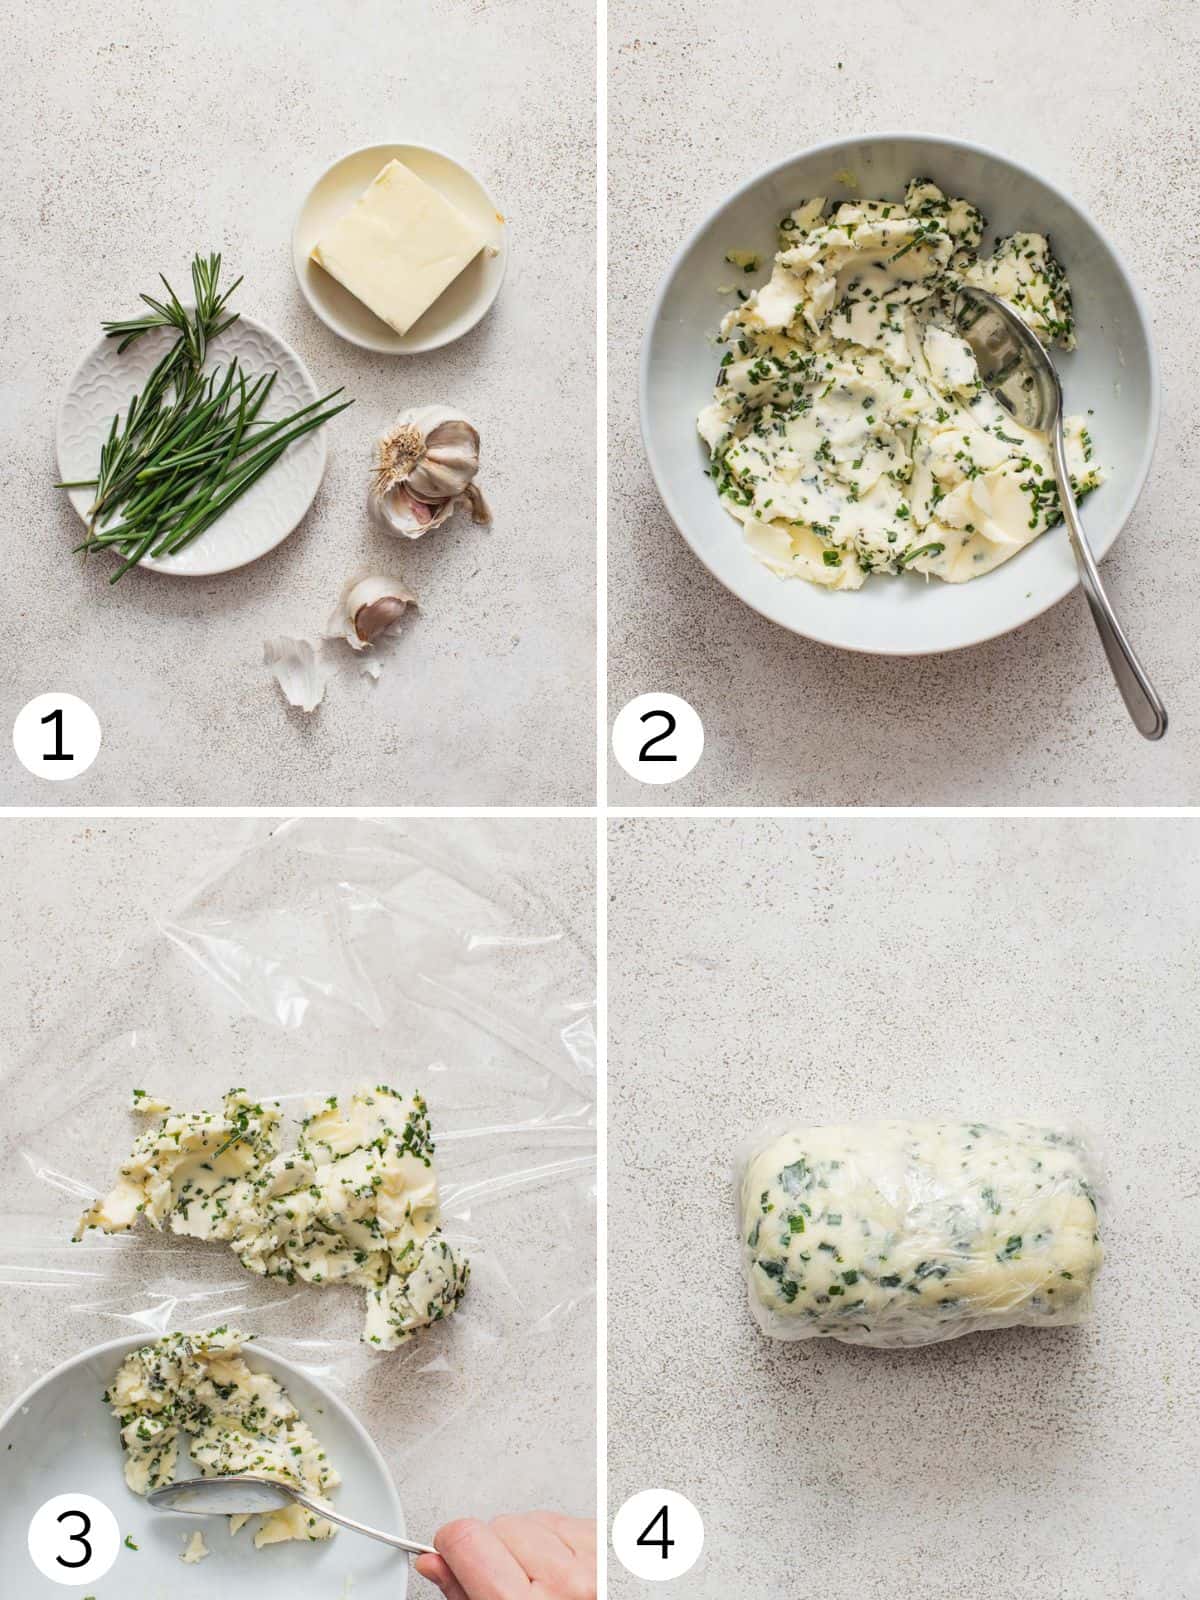 Four process shots showing how to make a chive garlic compound butter and roll it into a log for storage.